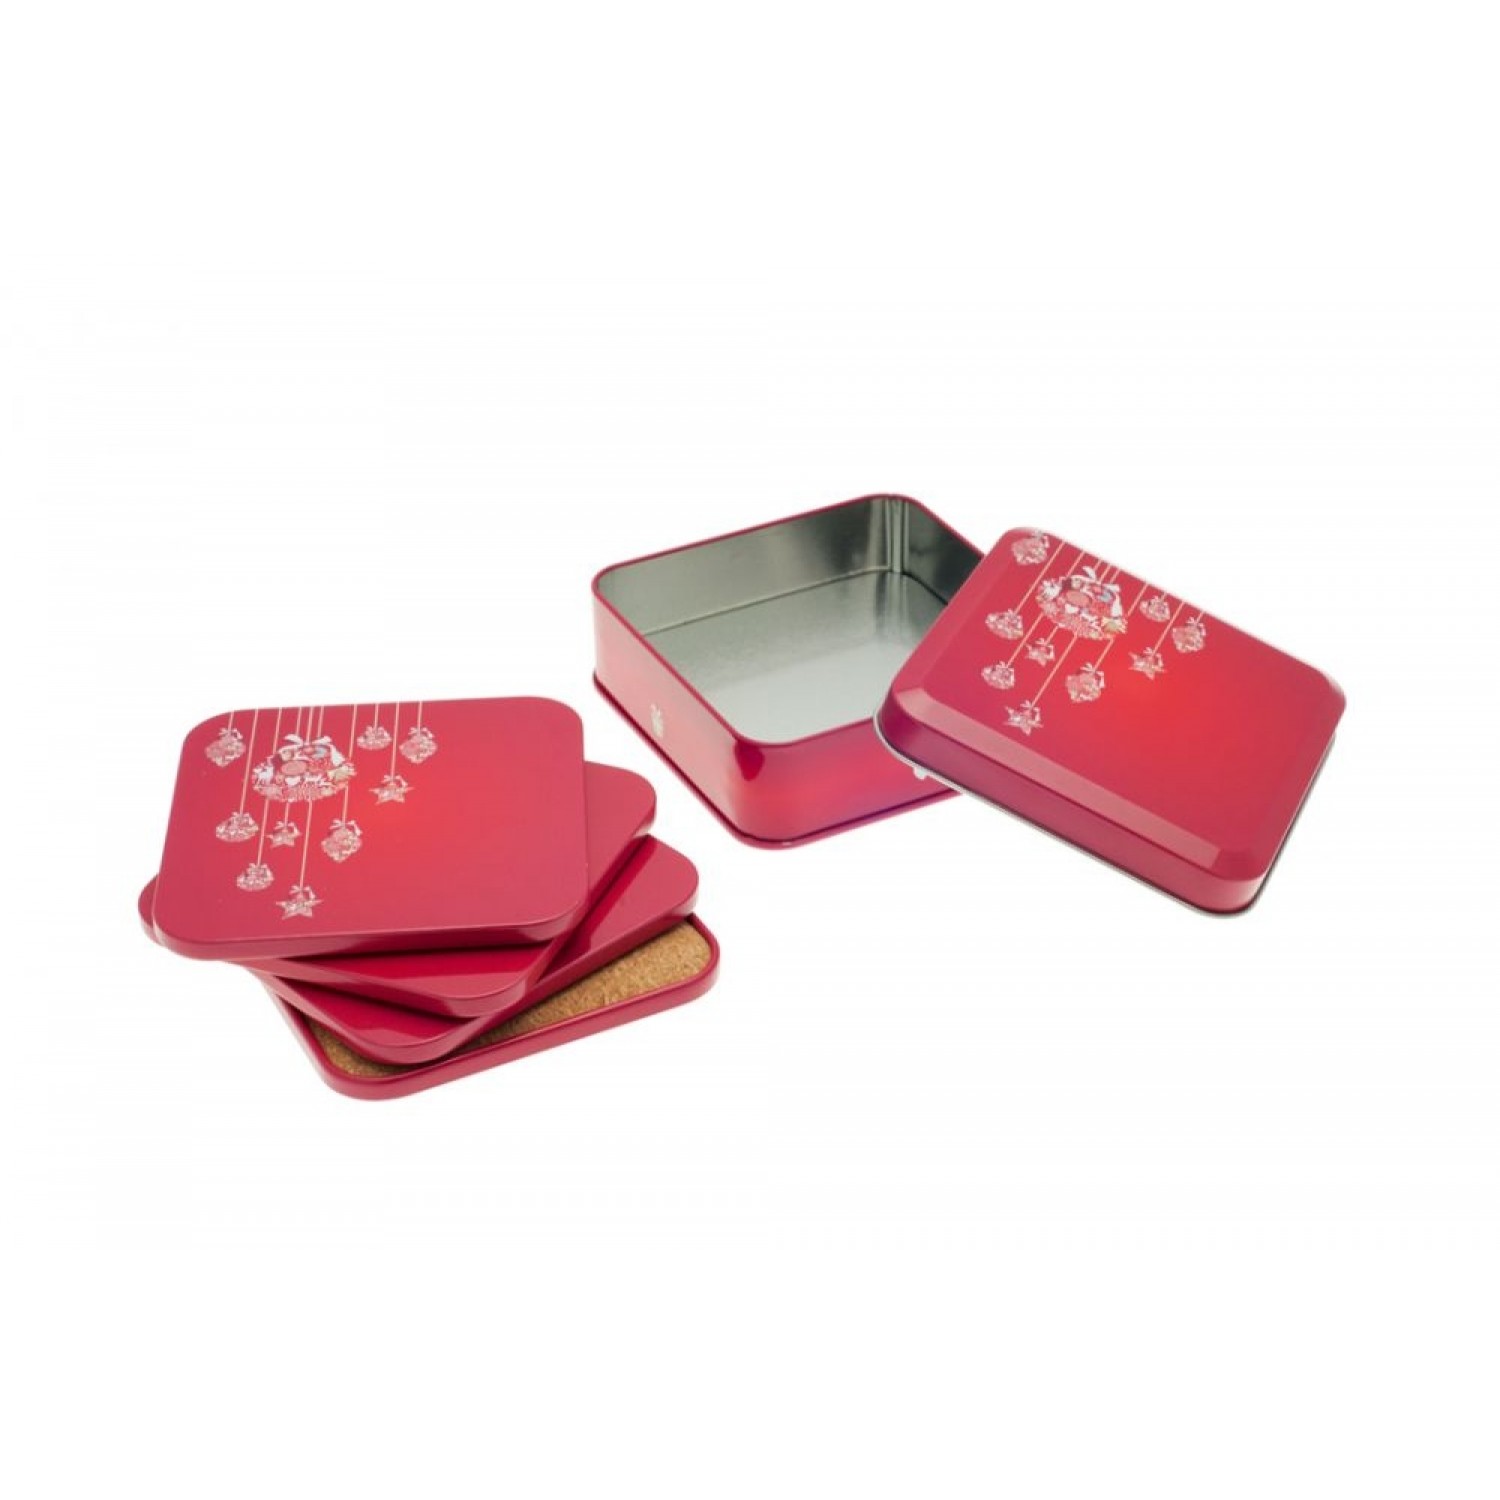 Red Coaster Christmas Time in decorative Tin Can | Tindobo